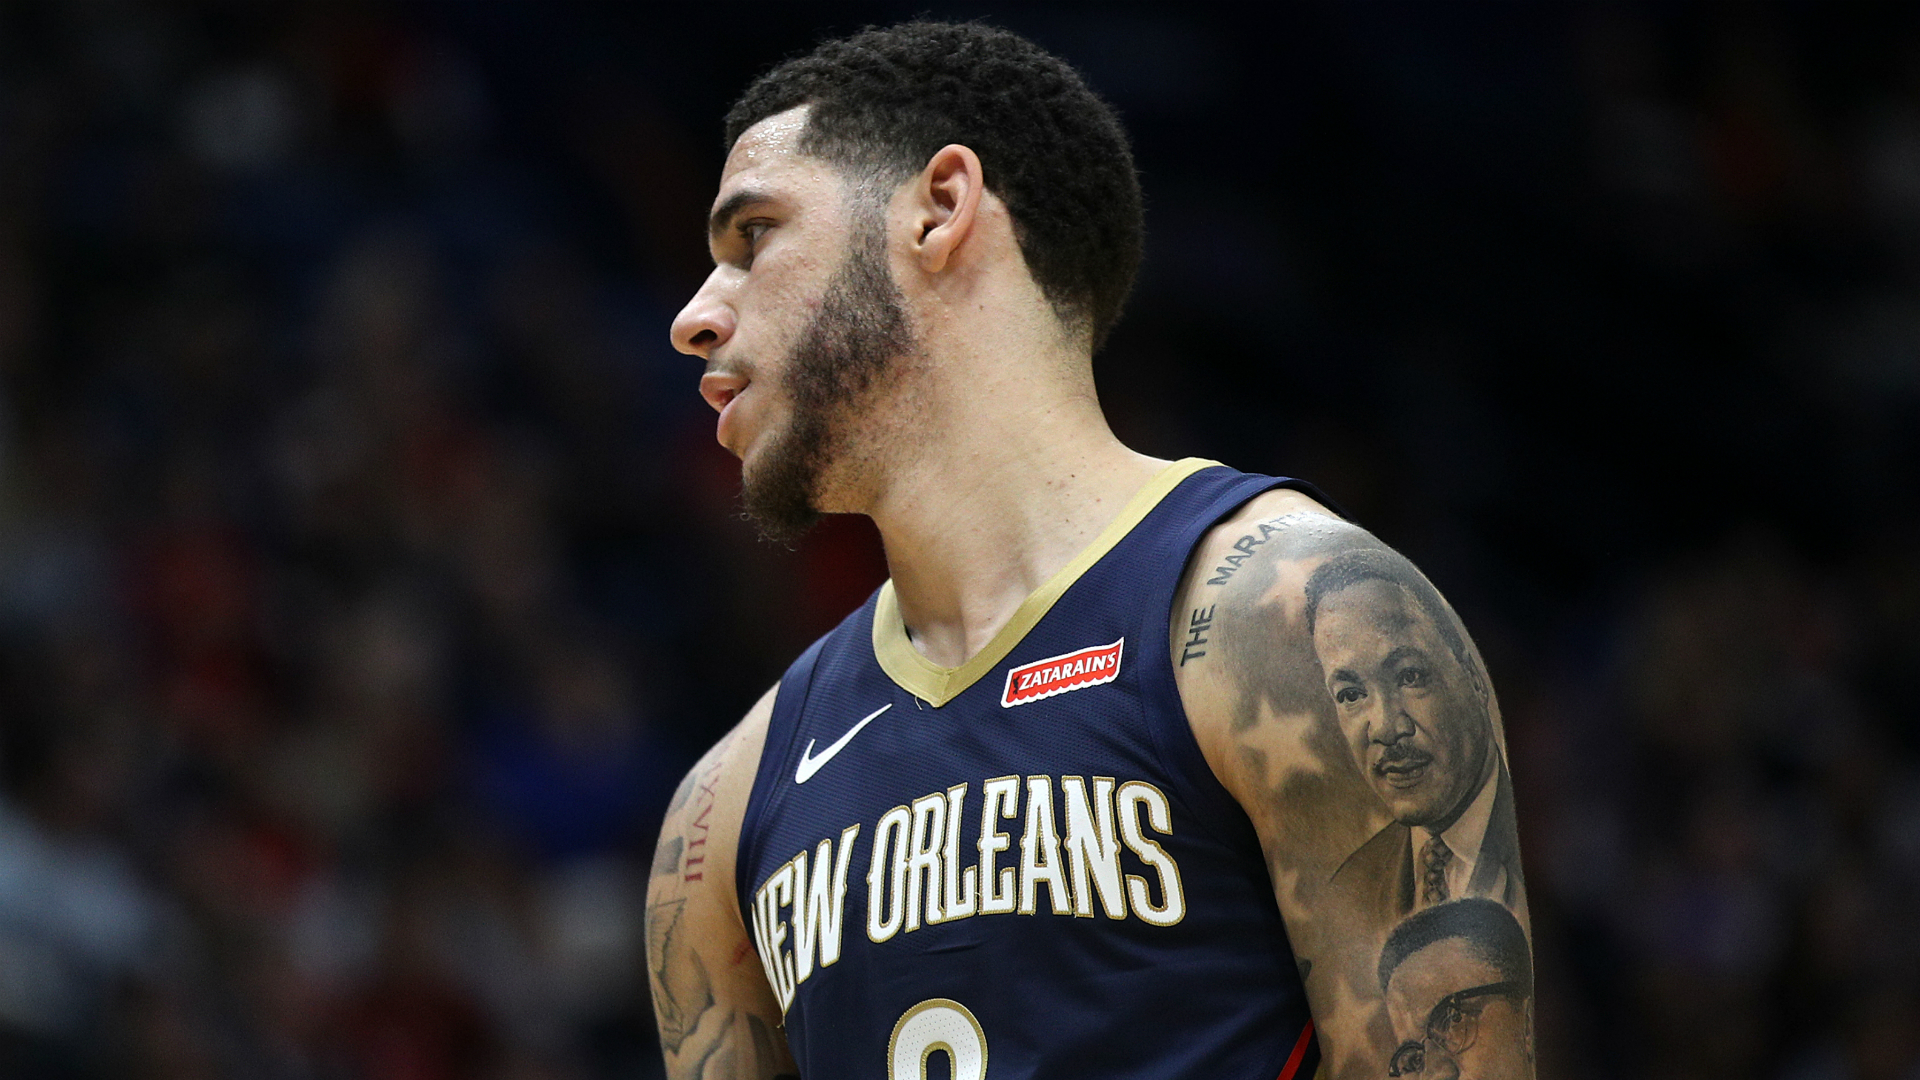 Sunday's defeat to the Orlando Magic set an unwanted record for the New Orleans Pelicans.